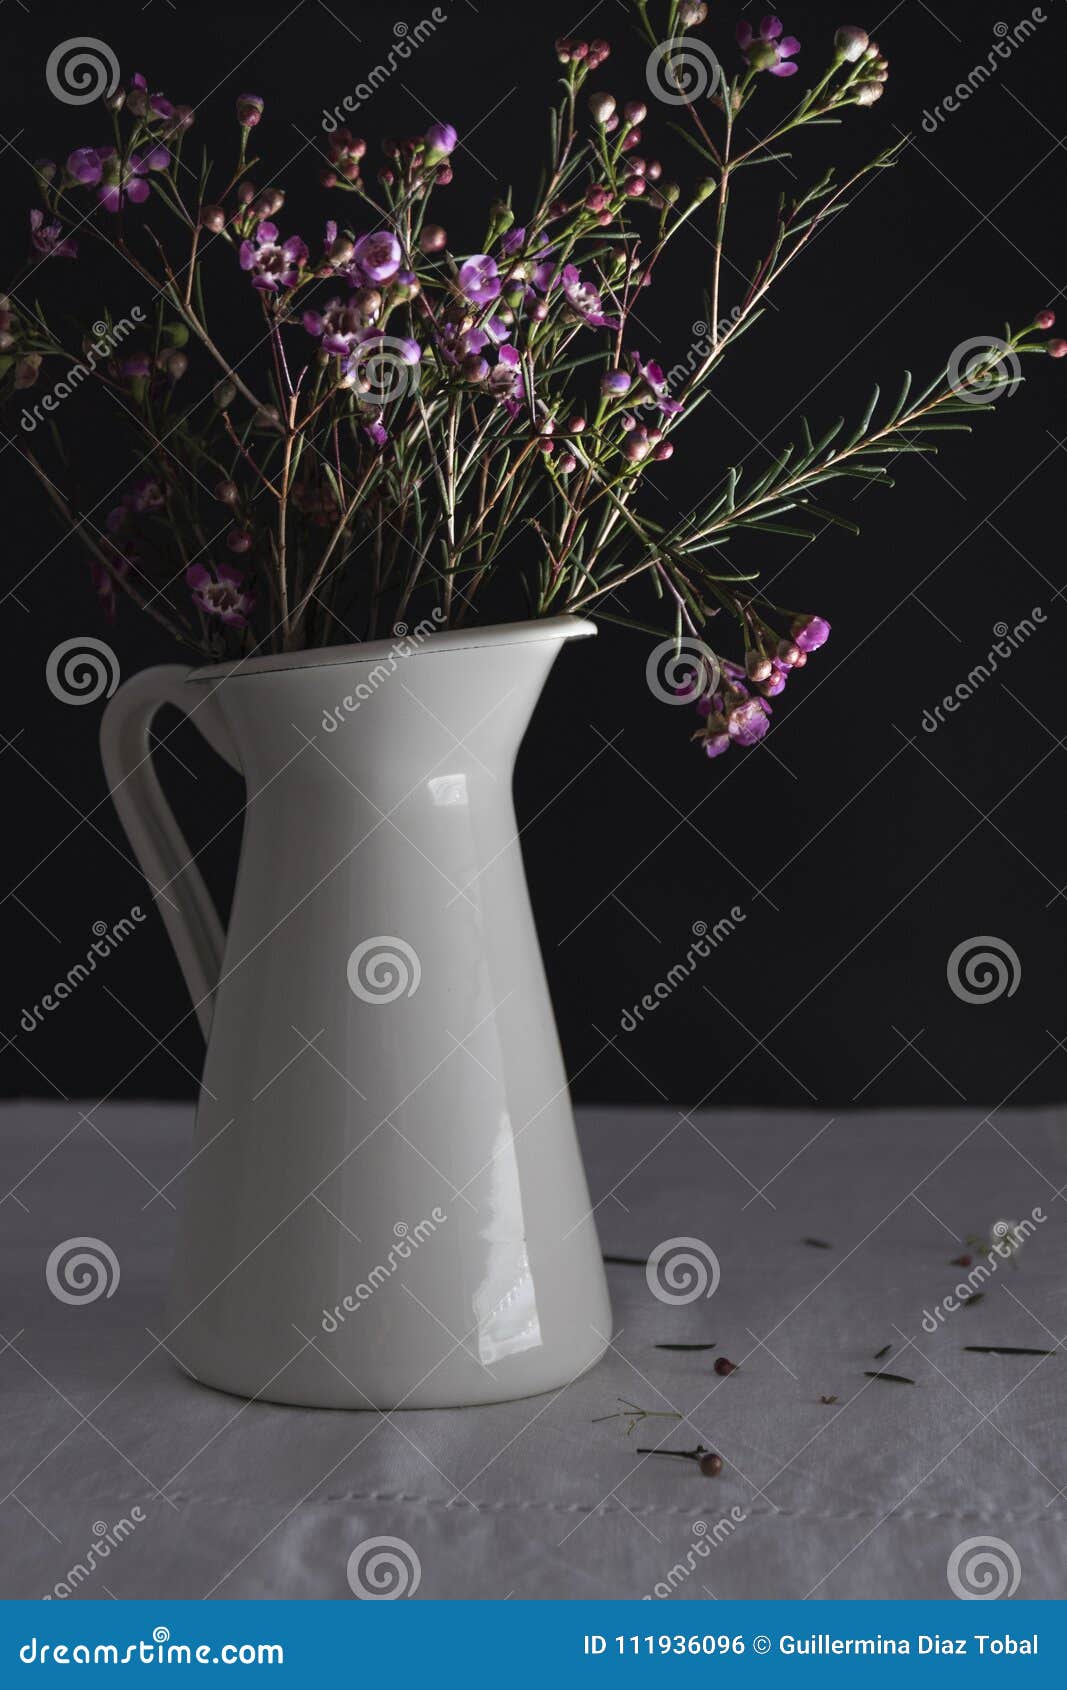 white vase with flowers and black background.